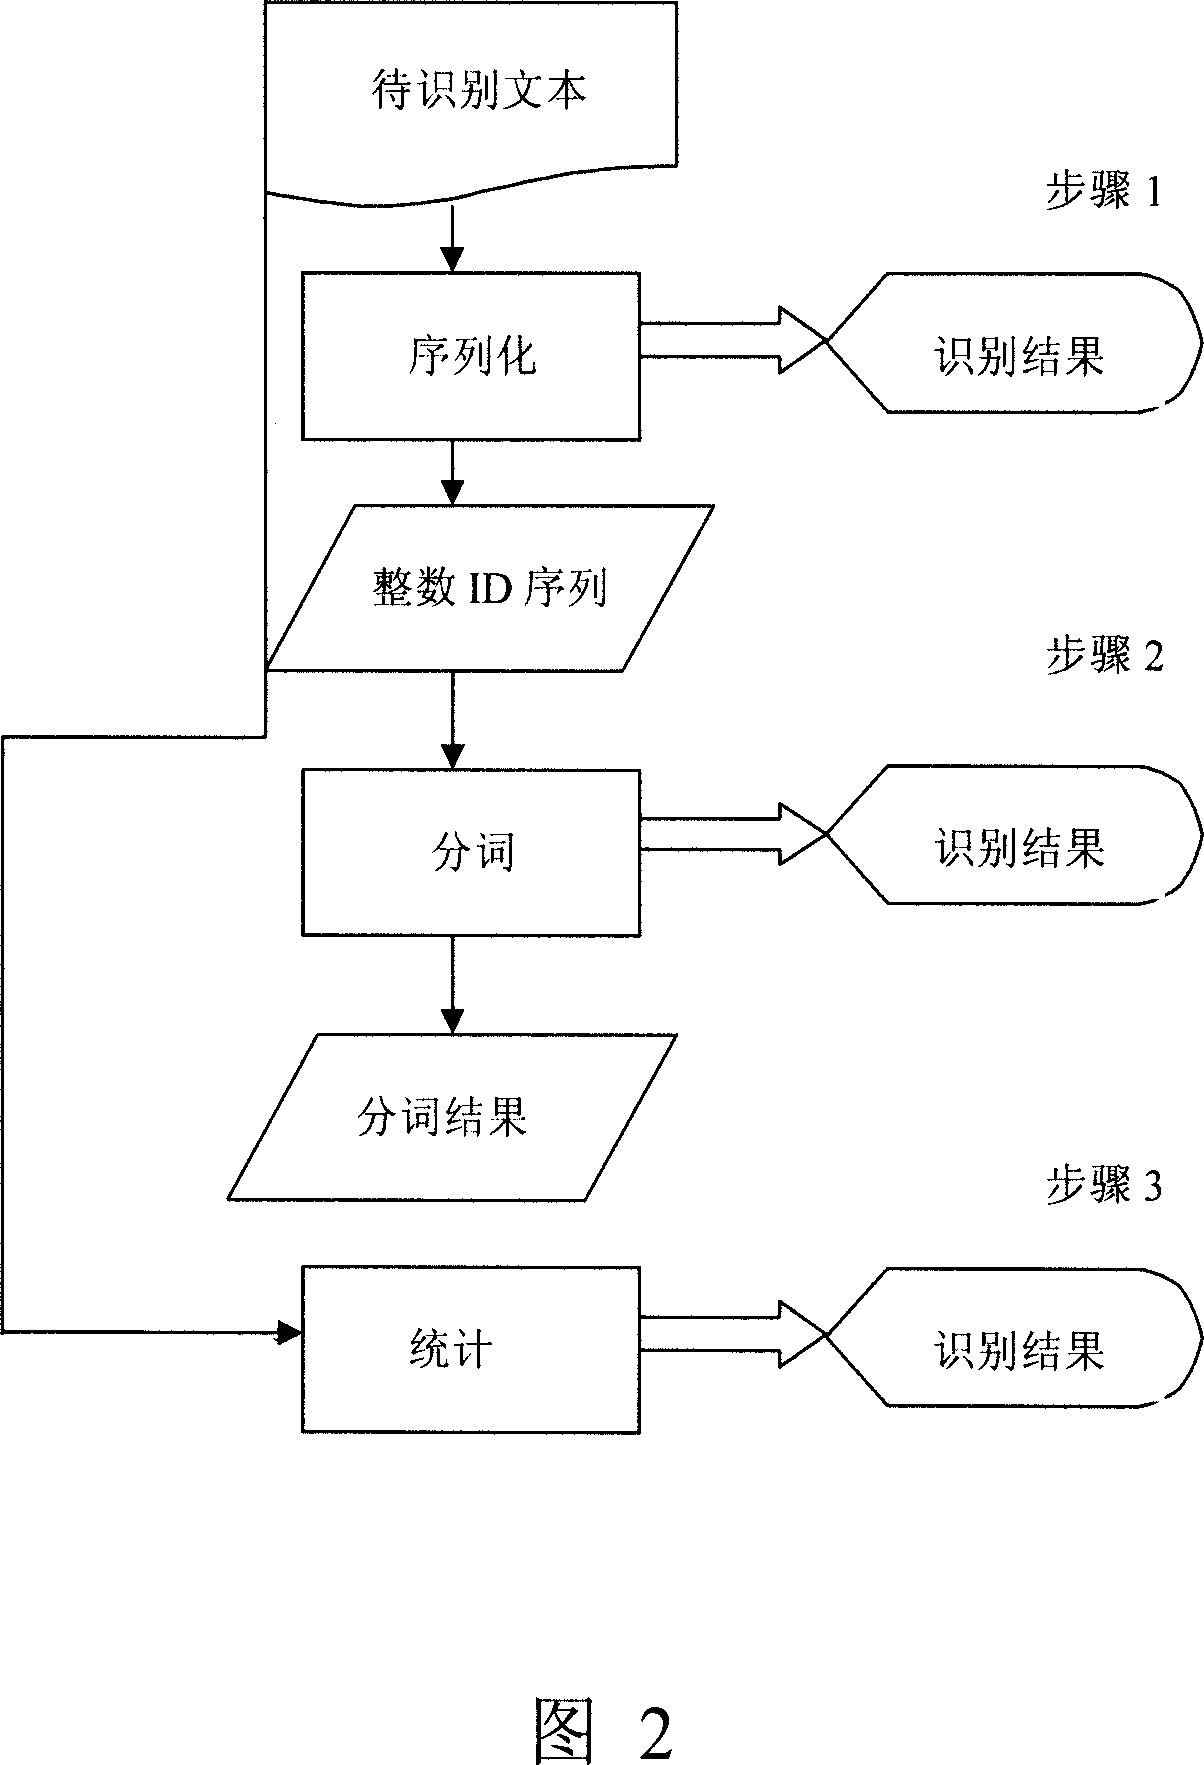 Method for identifying coding form of Chinese text